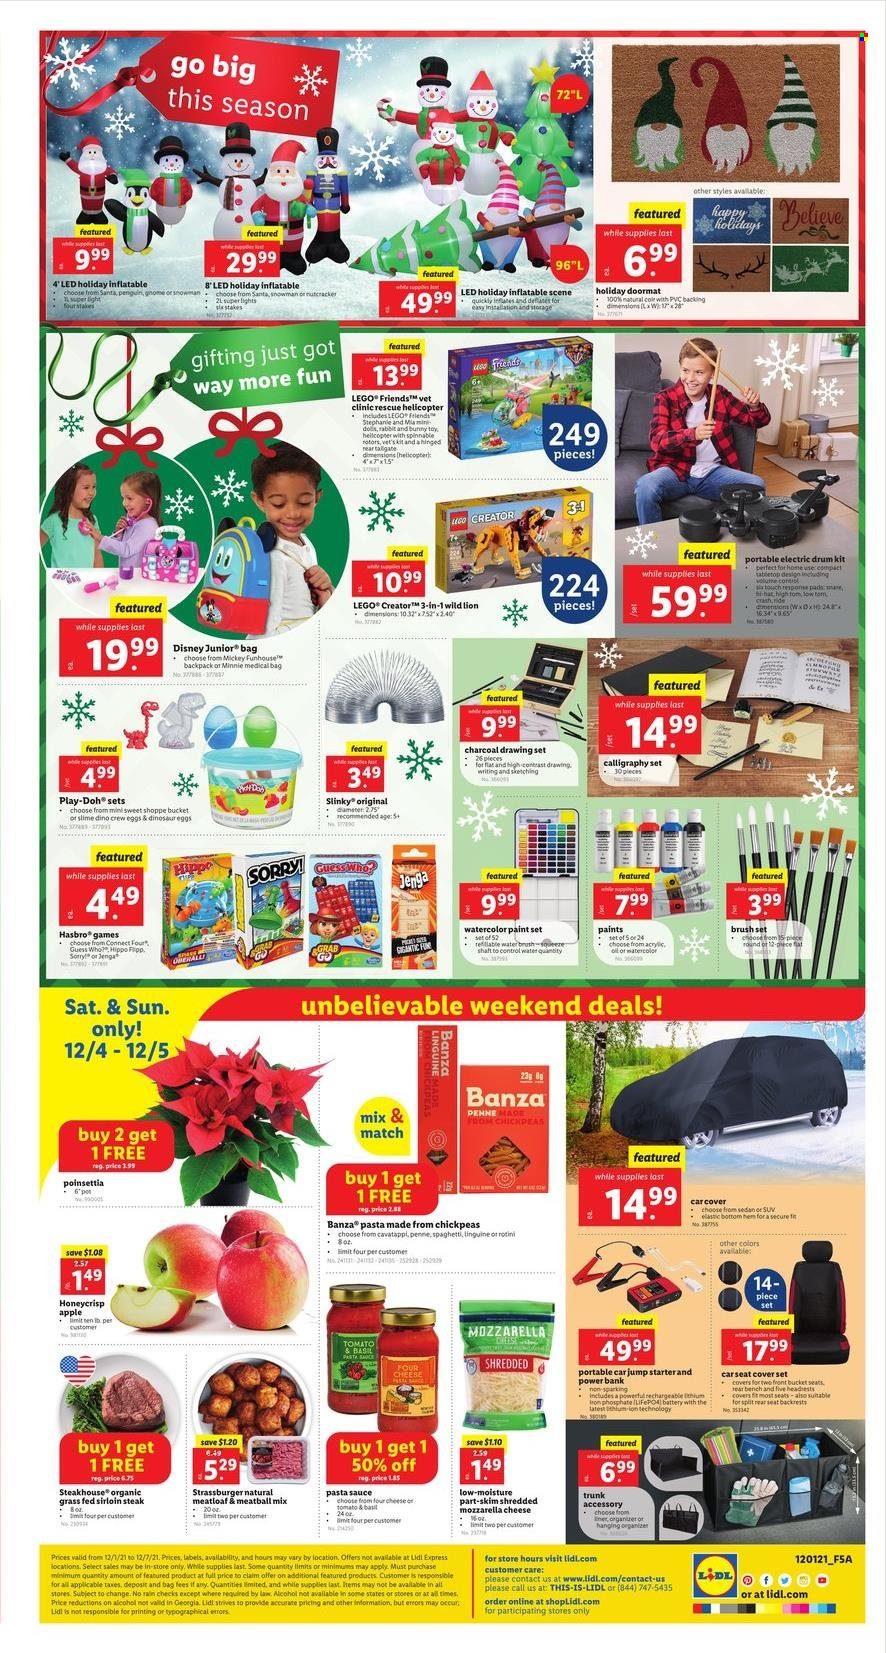 thumbnail - Lidl Flyer - 12/01/2021 - 12/07/2021 - Sales products - Guess, spaghetti, pasta sauce, sauce, mozzarella, cheese, Disney, eggs, Mickey Mouse, Santa, chickpeas, penne, beef sirloin, steak, sirloin steak, brush set, Minnie Mouse, drum kit, quilt cover set, power bank, Apple, LEGO, LEGO Friends, slinky, Play-doh, penguin, Hasbro, toys, dinosaur, helicopter, Slime, clinic rescue helicopter, paint, charcoal, door mat, poinsettia. Page 4.